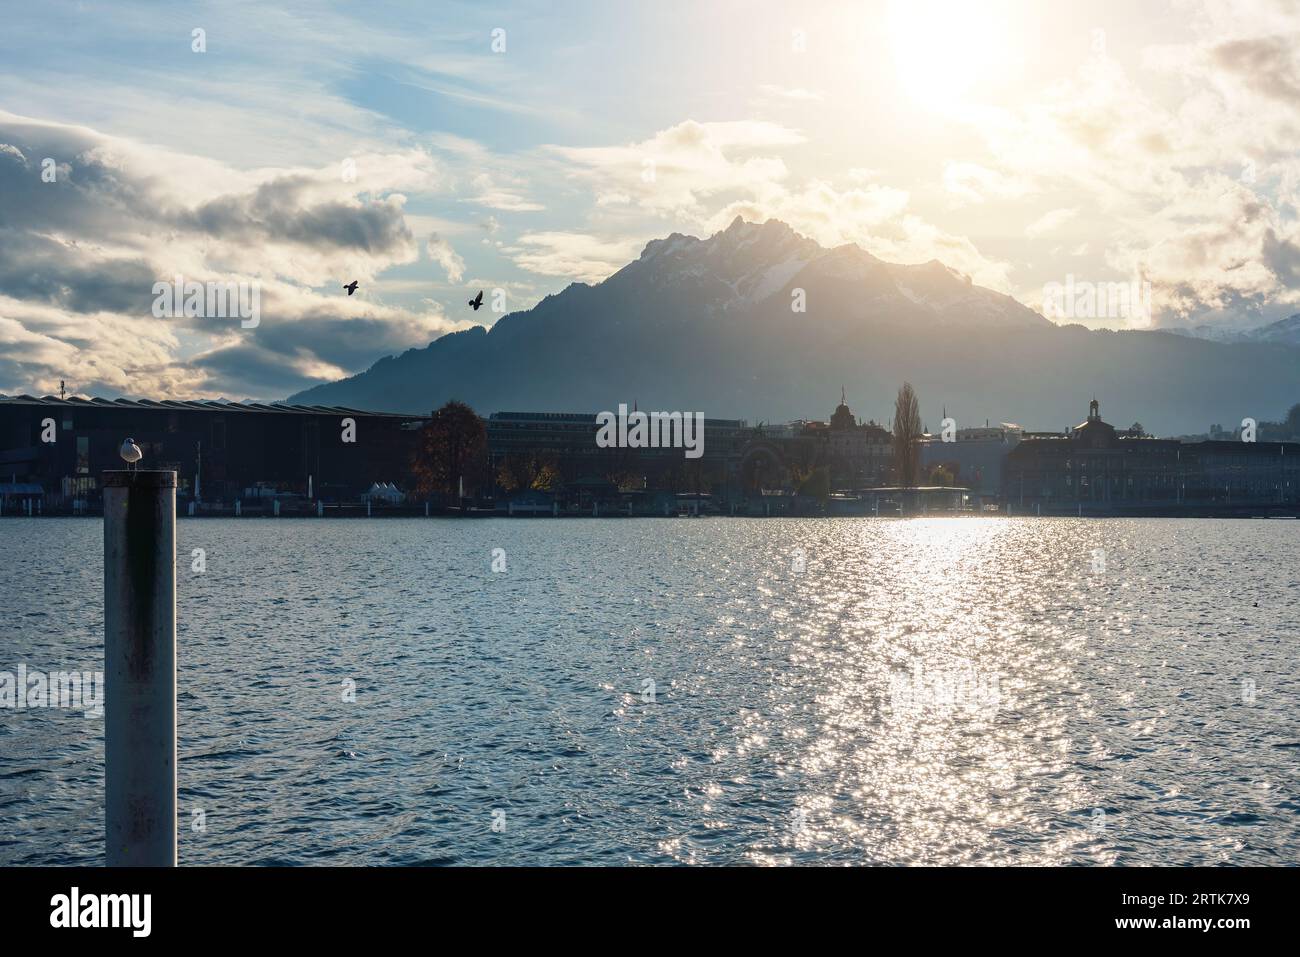 Swiss Alps and Mount Pilatus view with Lake Lucerne - Lucerne, Switzerland Stock Photo